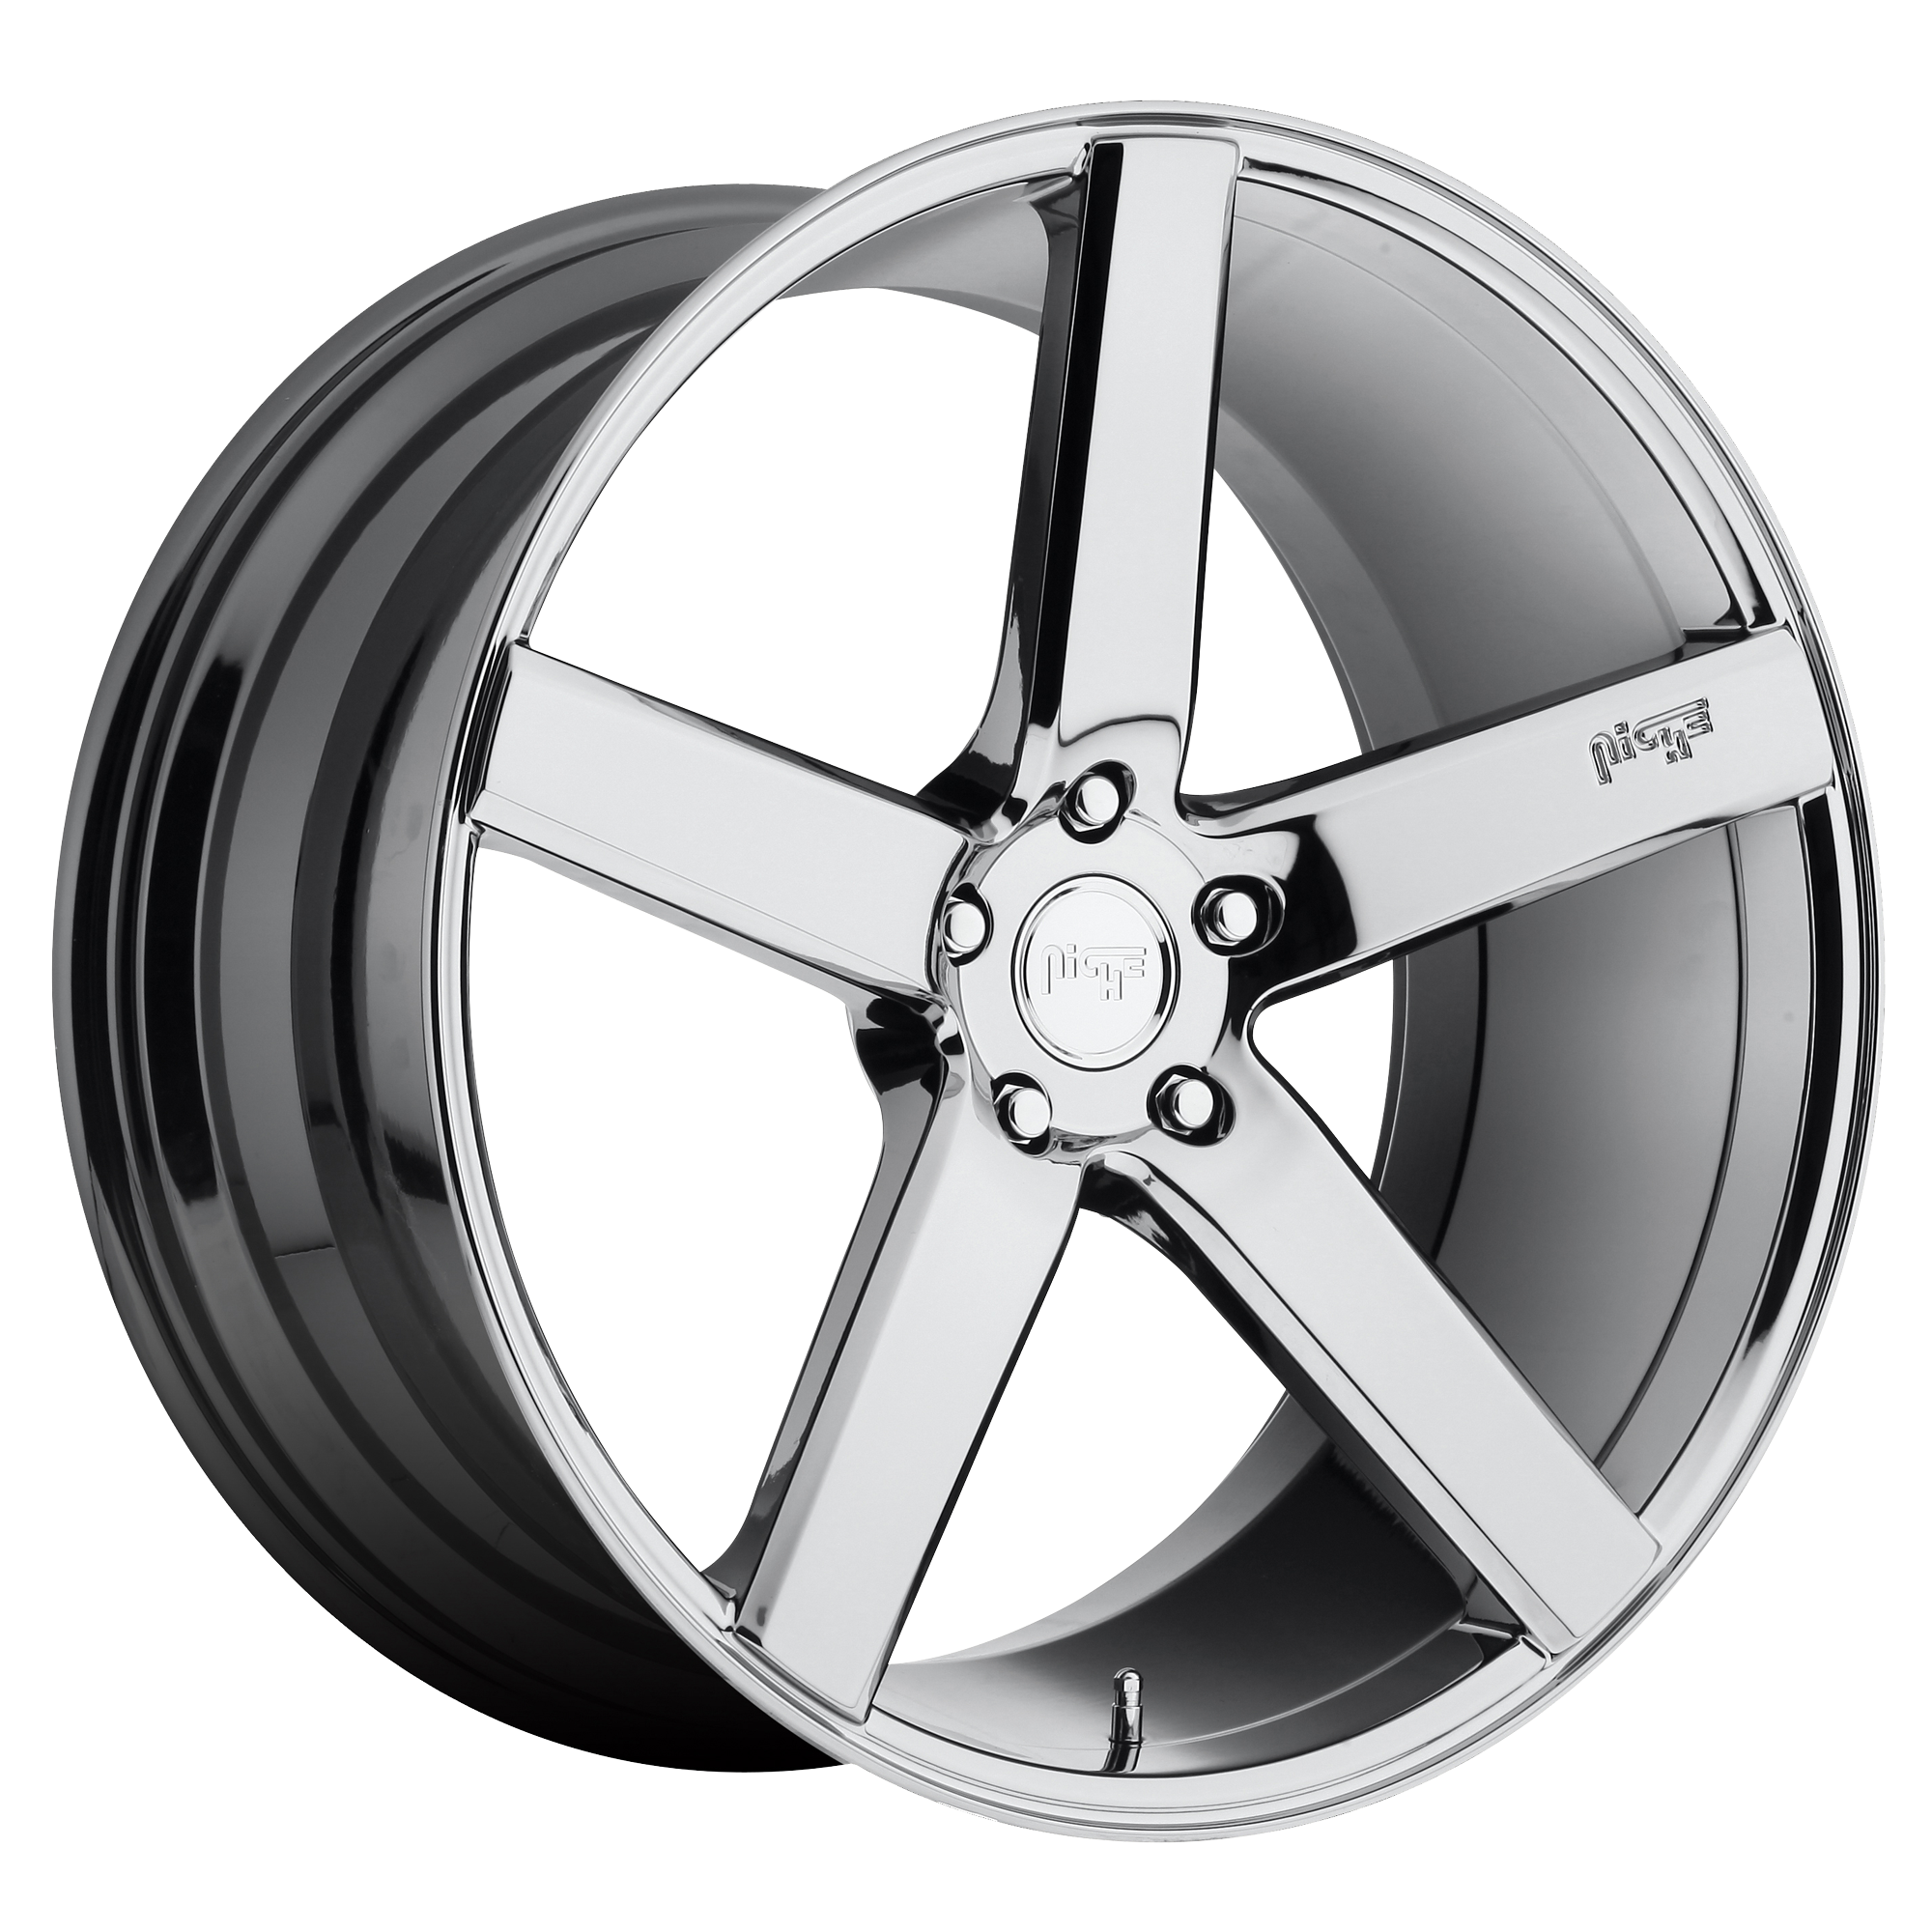 MILAN 19x8.5 5x114.30 CHROME PLATED (35 mm) - Tires and Engine Performance